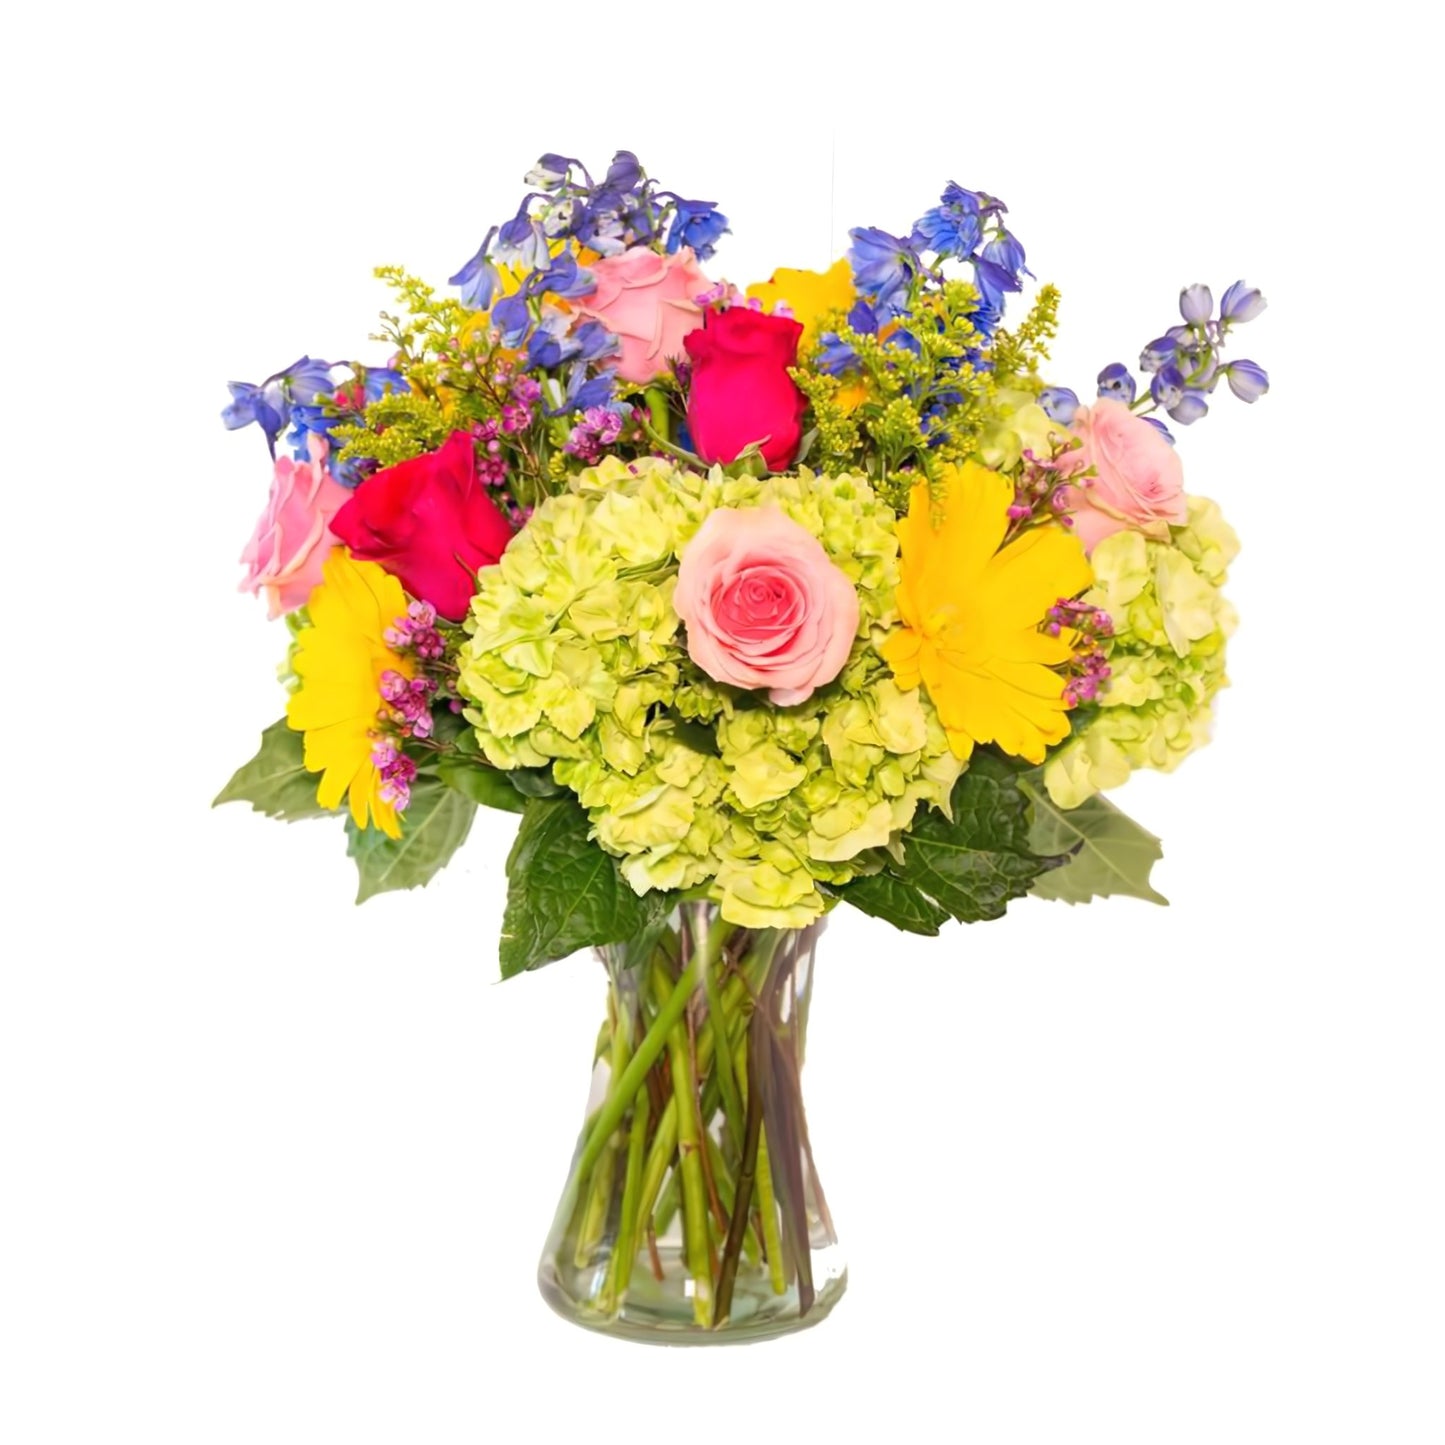 French Country Garden Bouquet - Floral Arrangement - Queens Flower Delivery